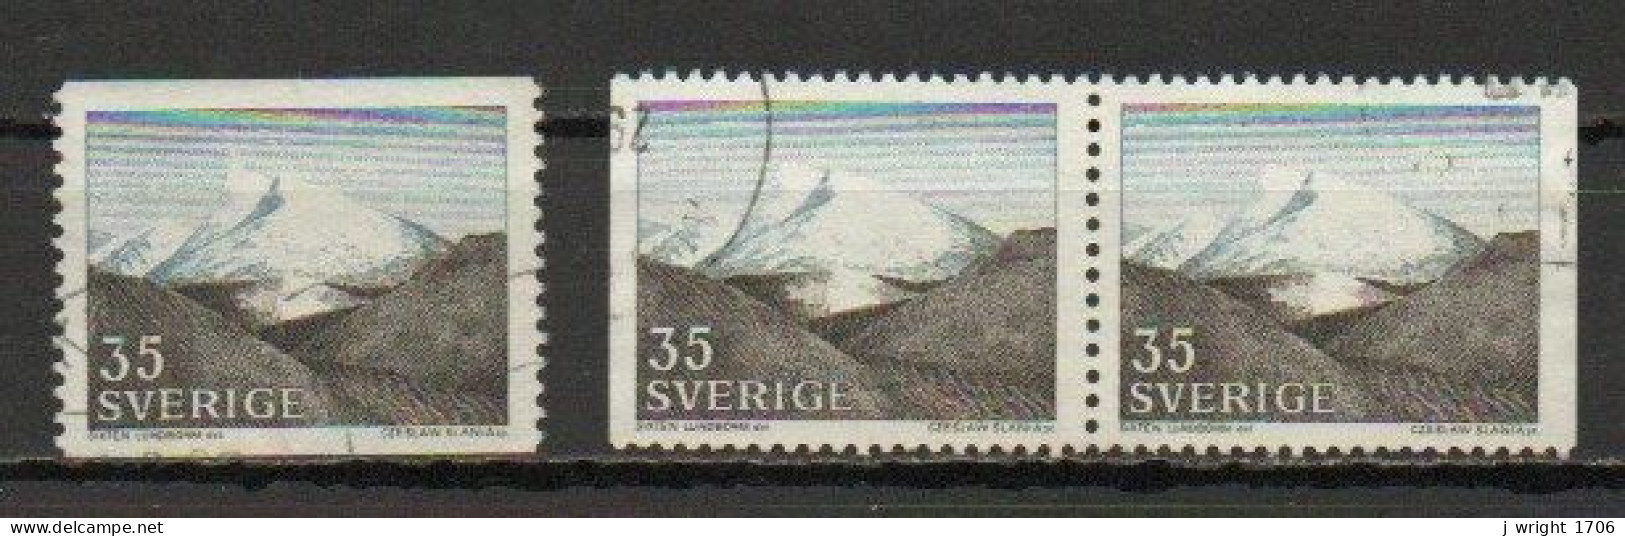 Sweden, 1967, Mountain Scenery, 35ö, USED - Used Stamps